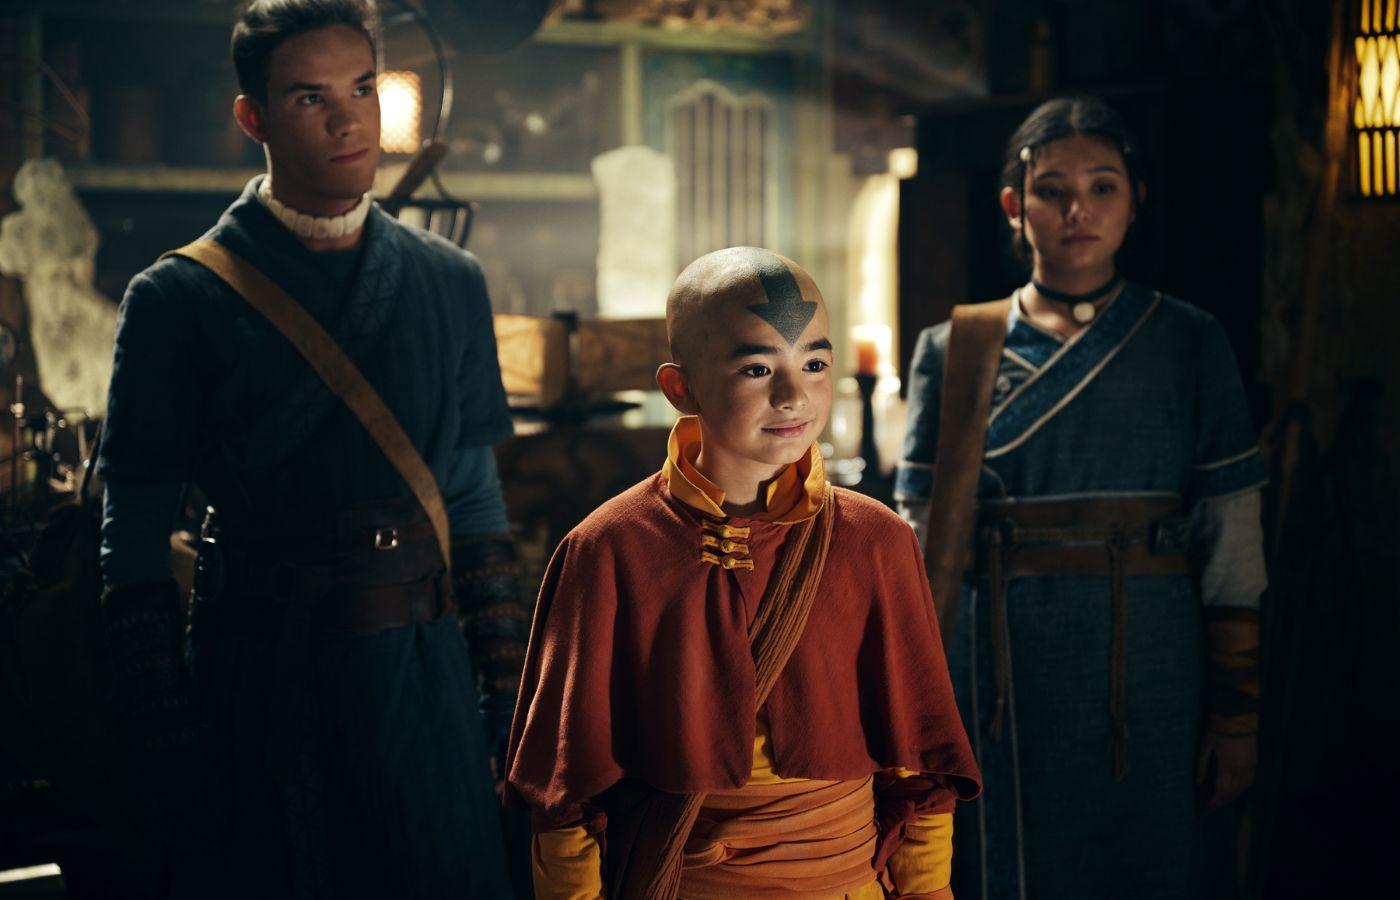 Aang, Sokka, and Katara in the cast of Avatar: The Last Airbender